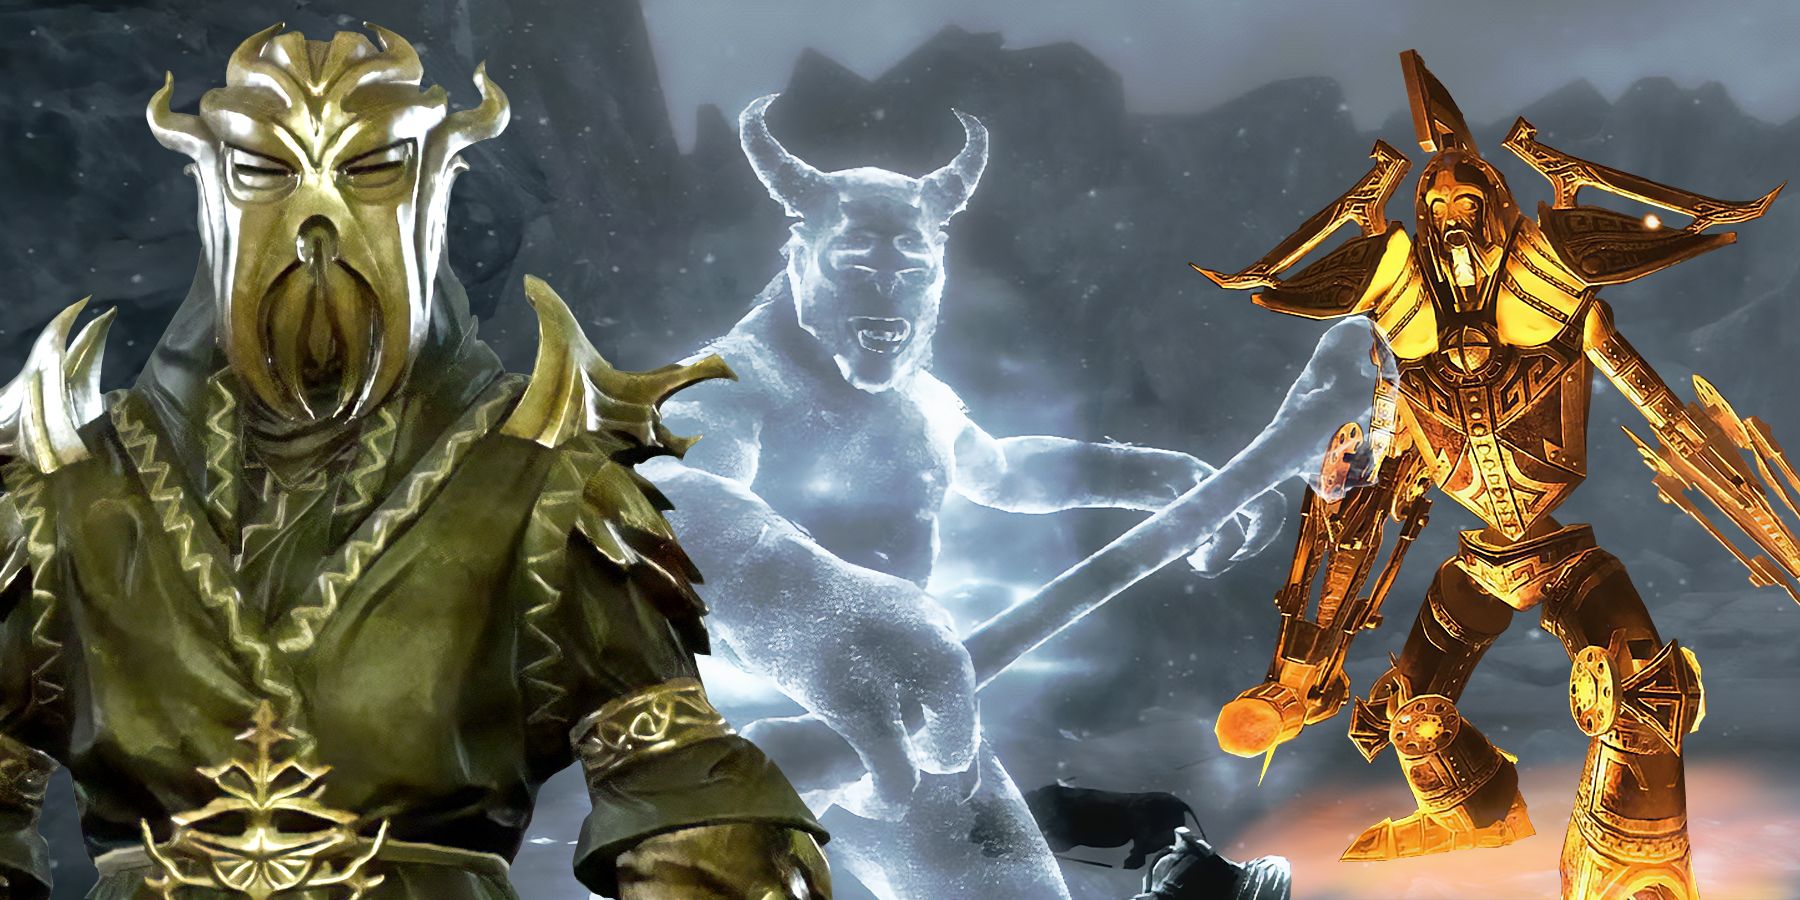 Skyrim: How To Summon And Defeat Karstaag In The Dragonborn DLC